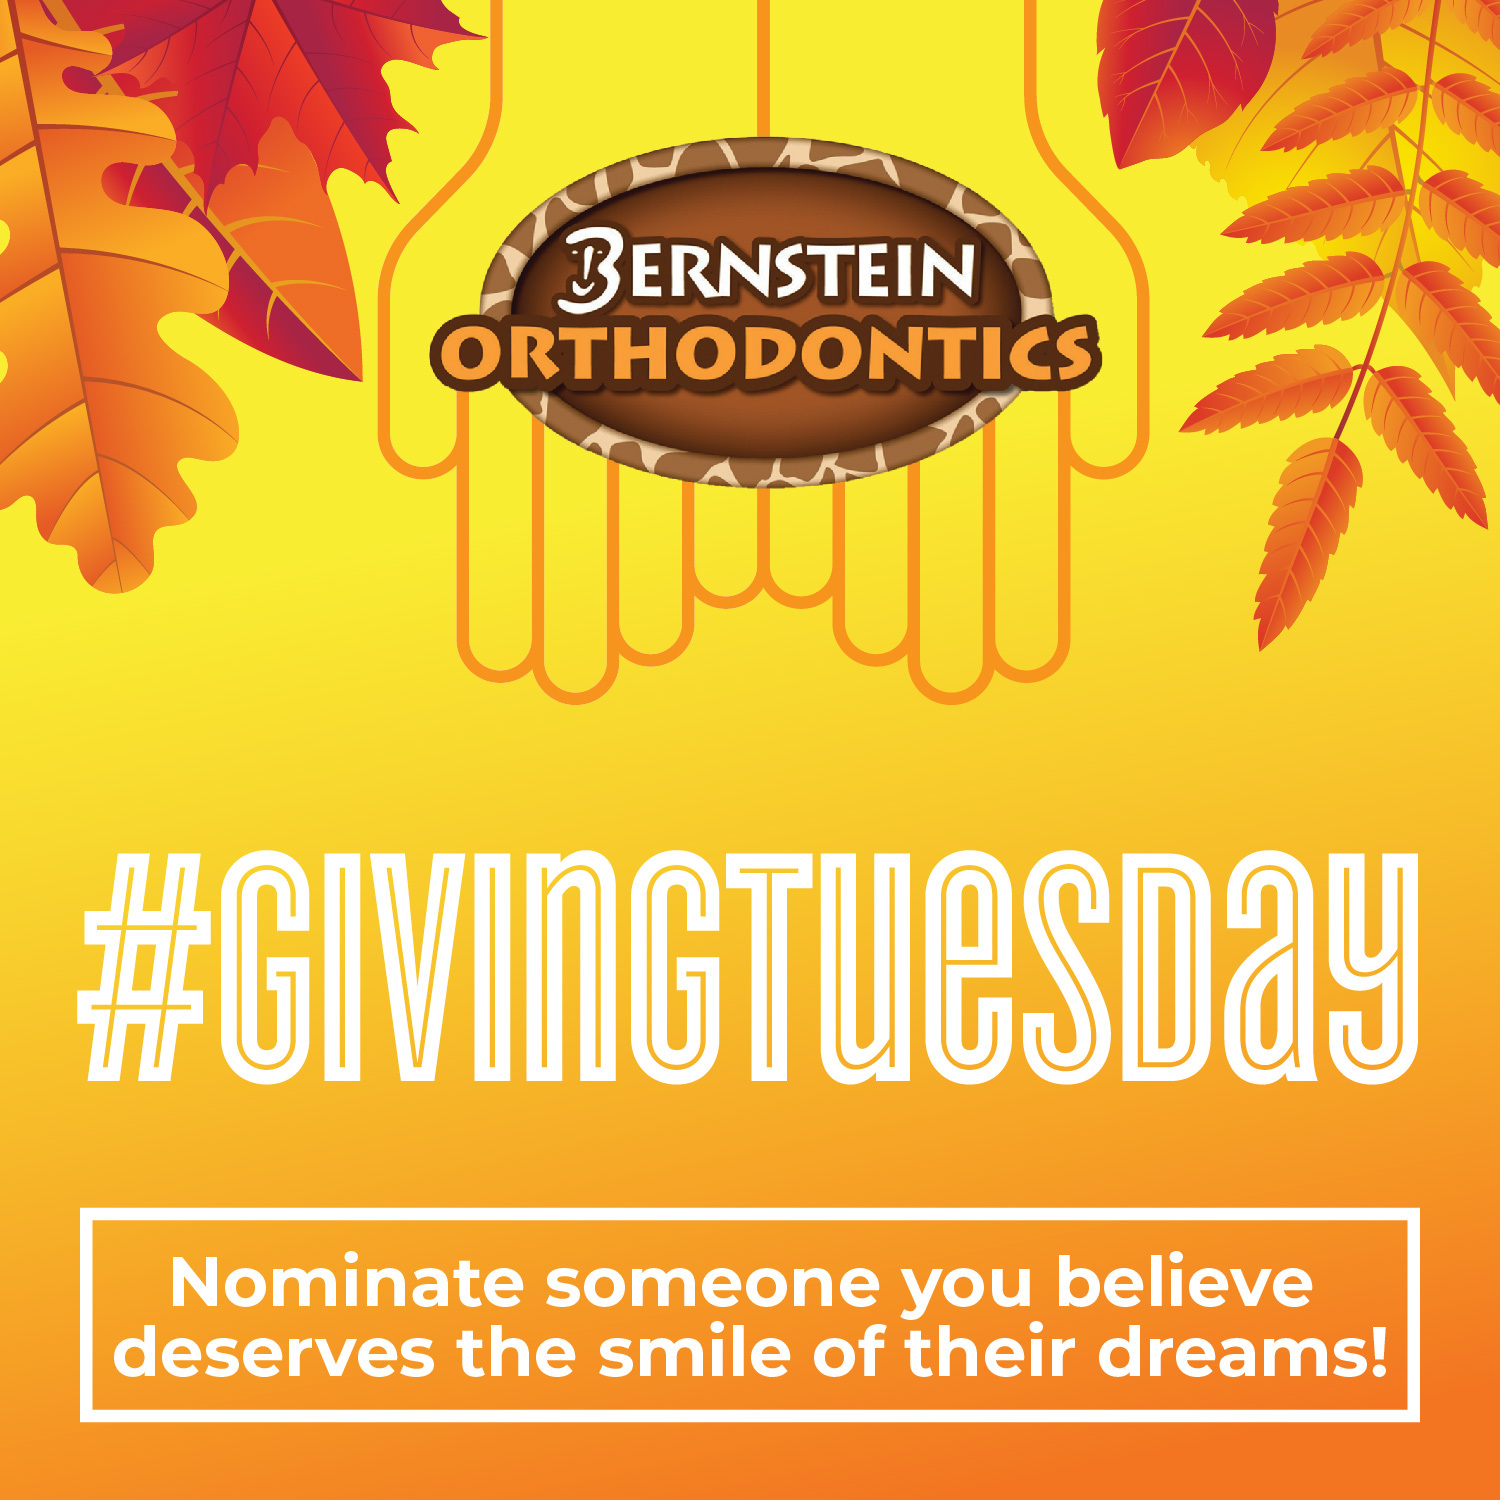 2022-10-27_Bernstein_Giving Tuesday Campaign_CC